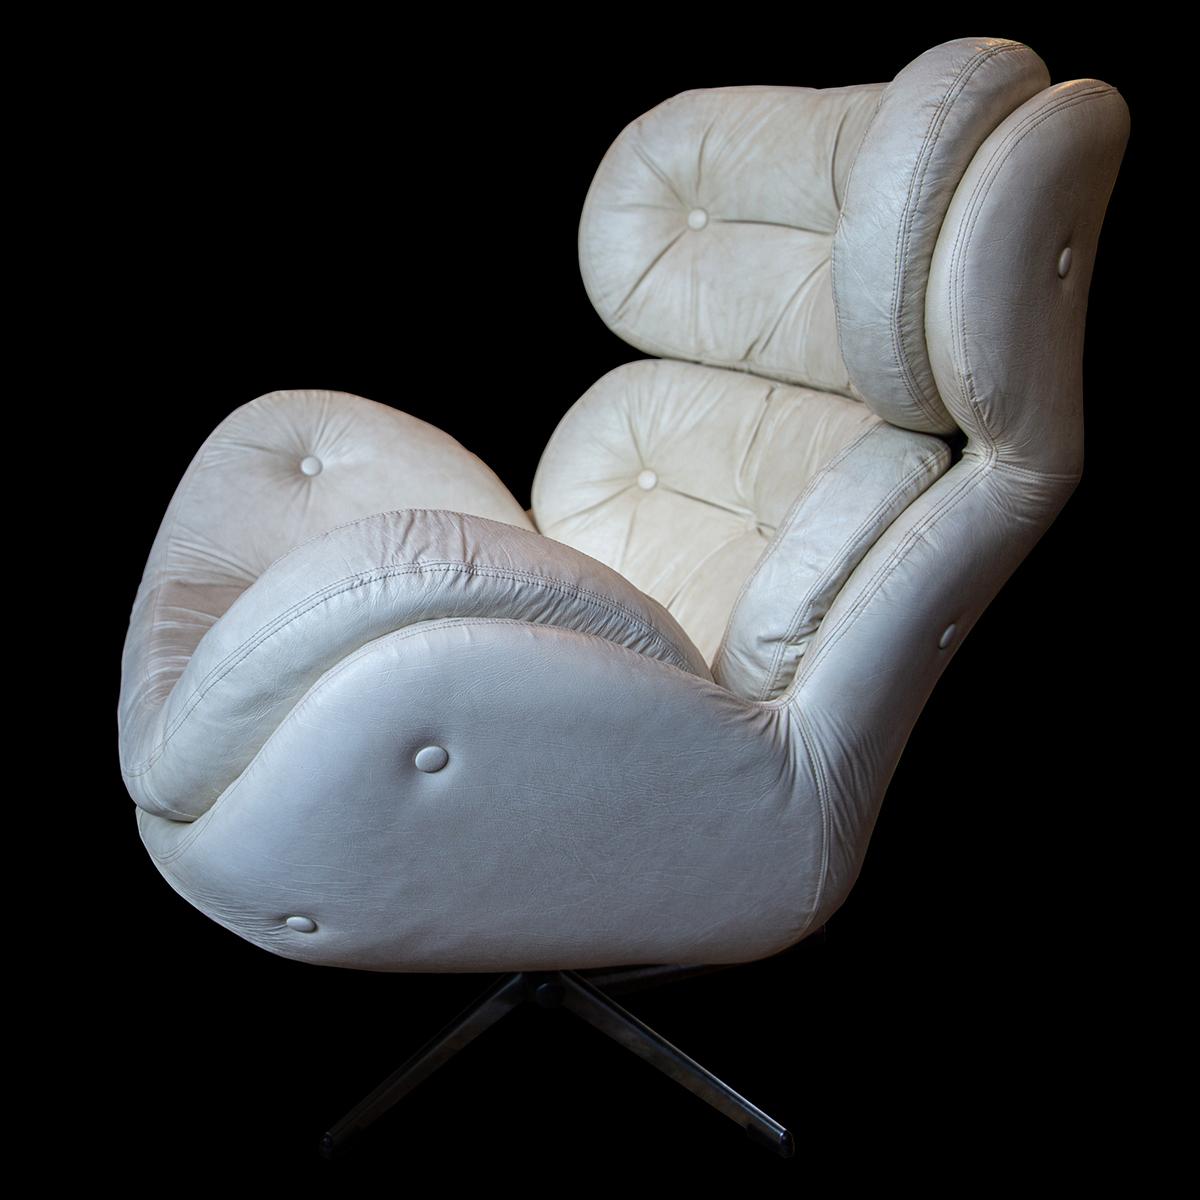 Stunning and compact body hugging sculptural form - a more rarefied and original take on an Eames. Suited to the individualist that appreciates experimental ergonomic design of the early seventies founded on principles of minimal sleek lines and